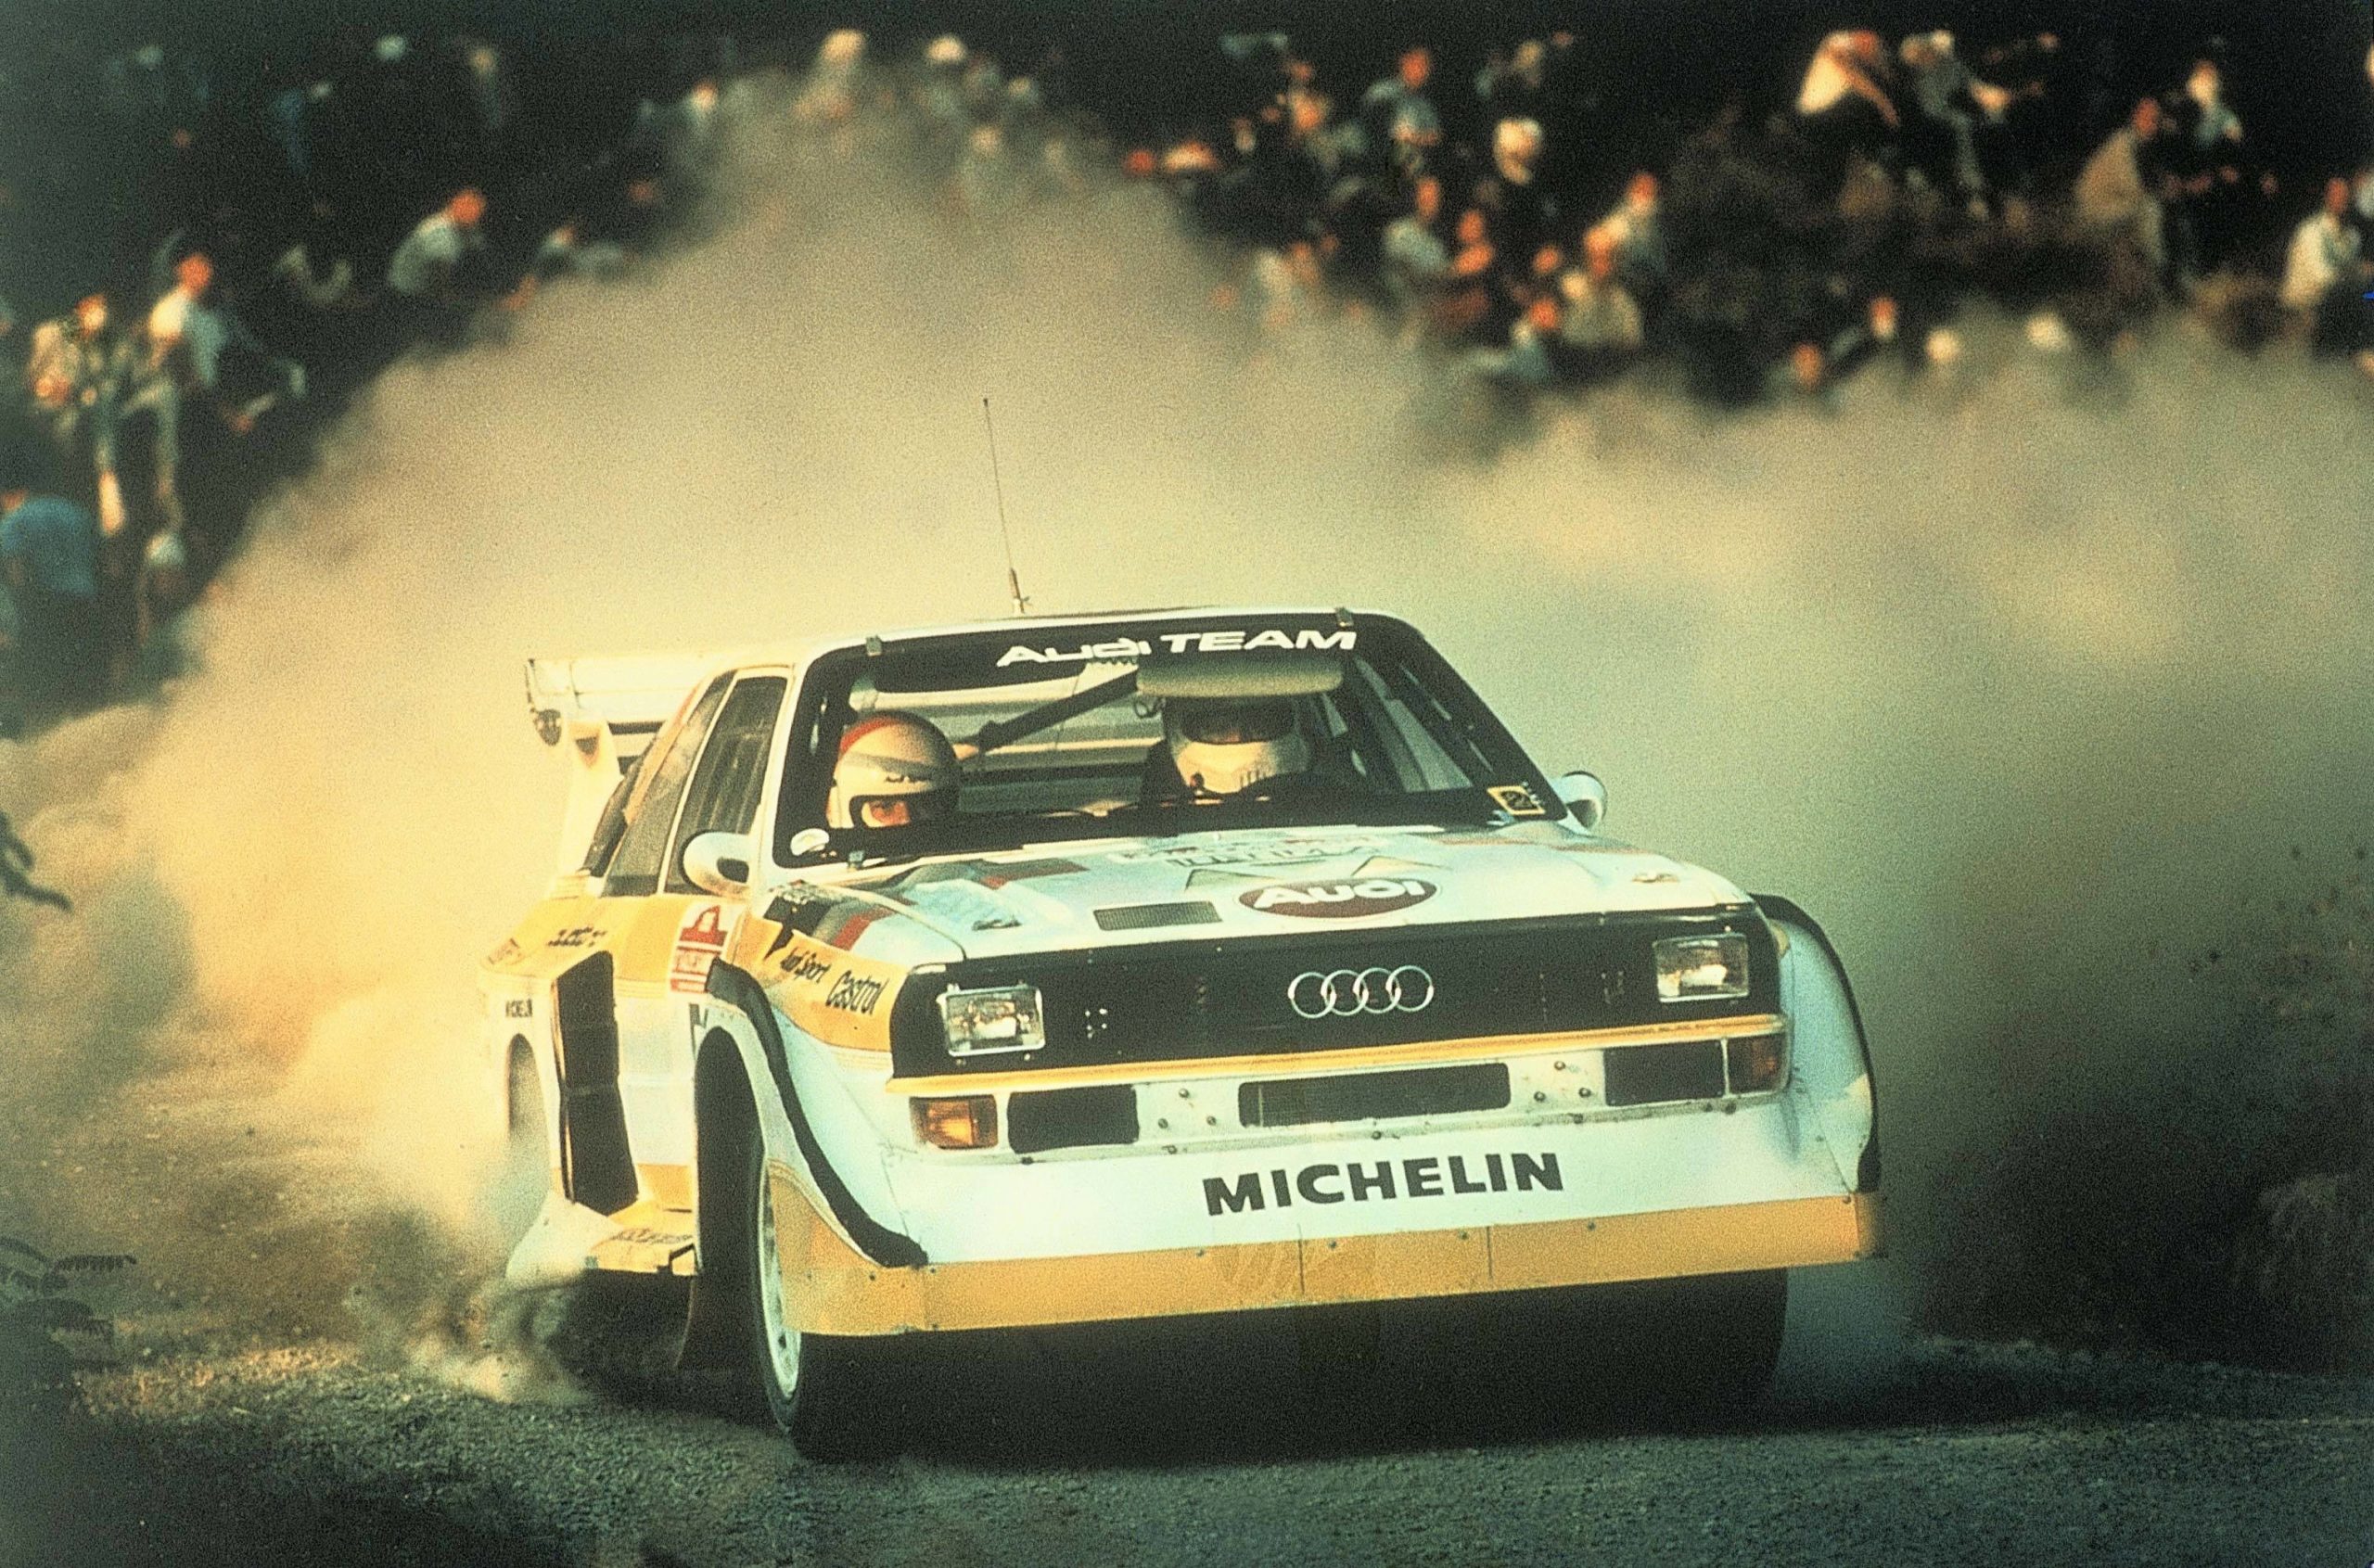 1985: Walter Röhrl wins the Rally San Remo with the Audi Sport quattro S1